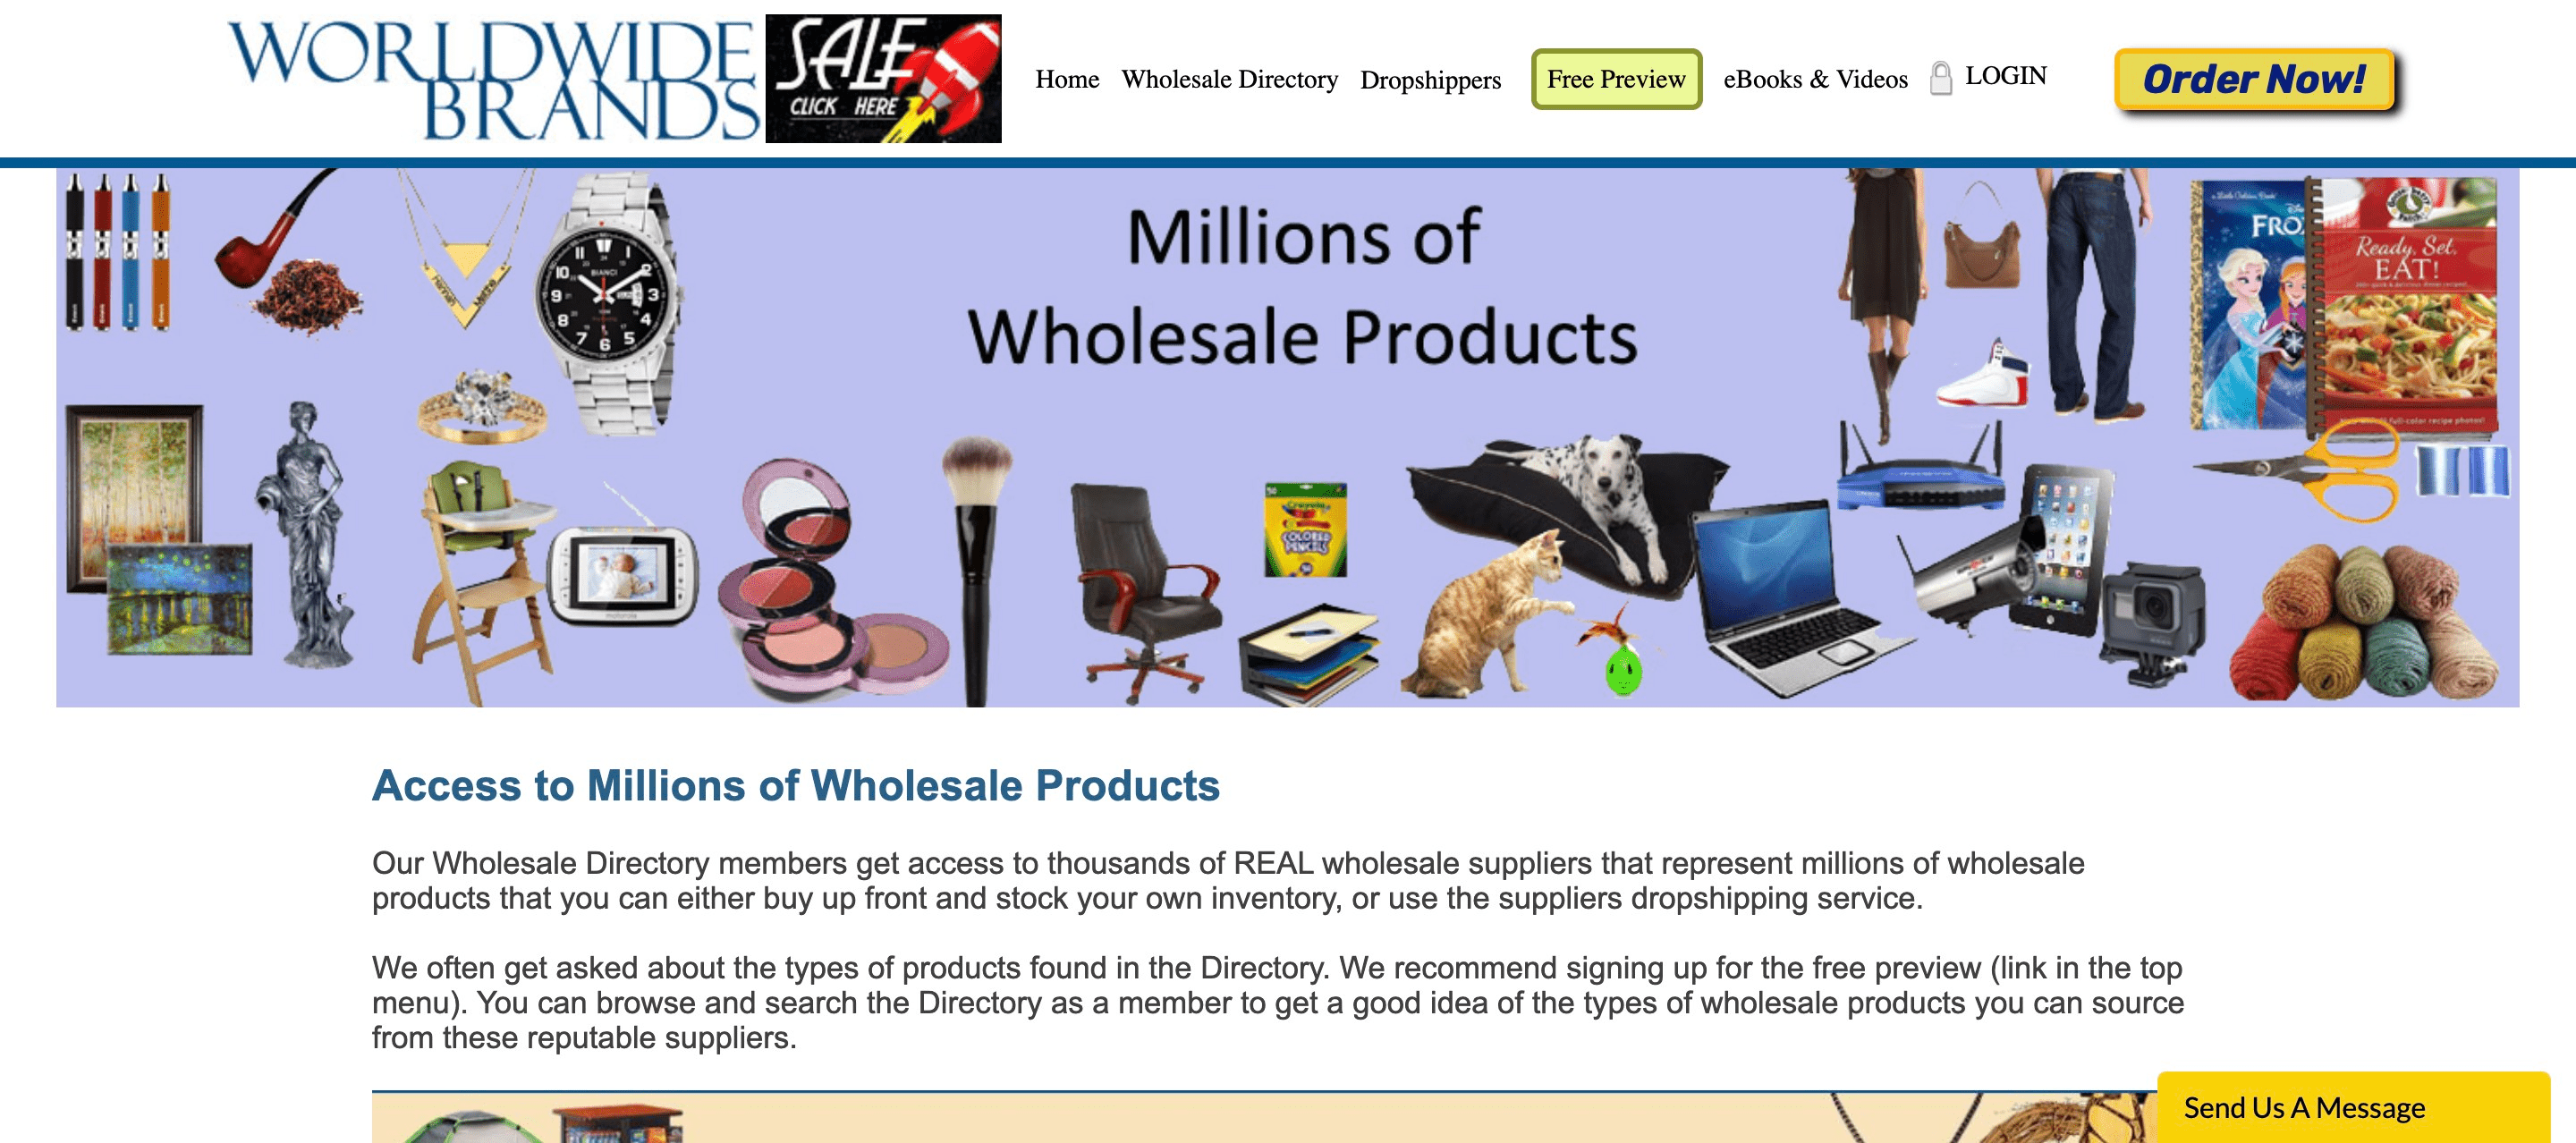 Wholesale Products available in Worldwide Brands directory